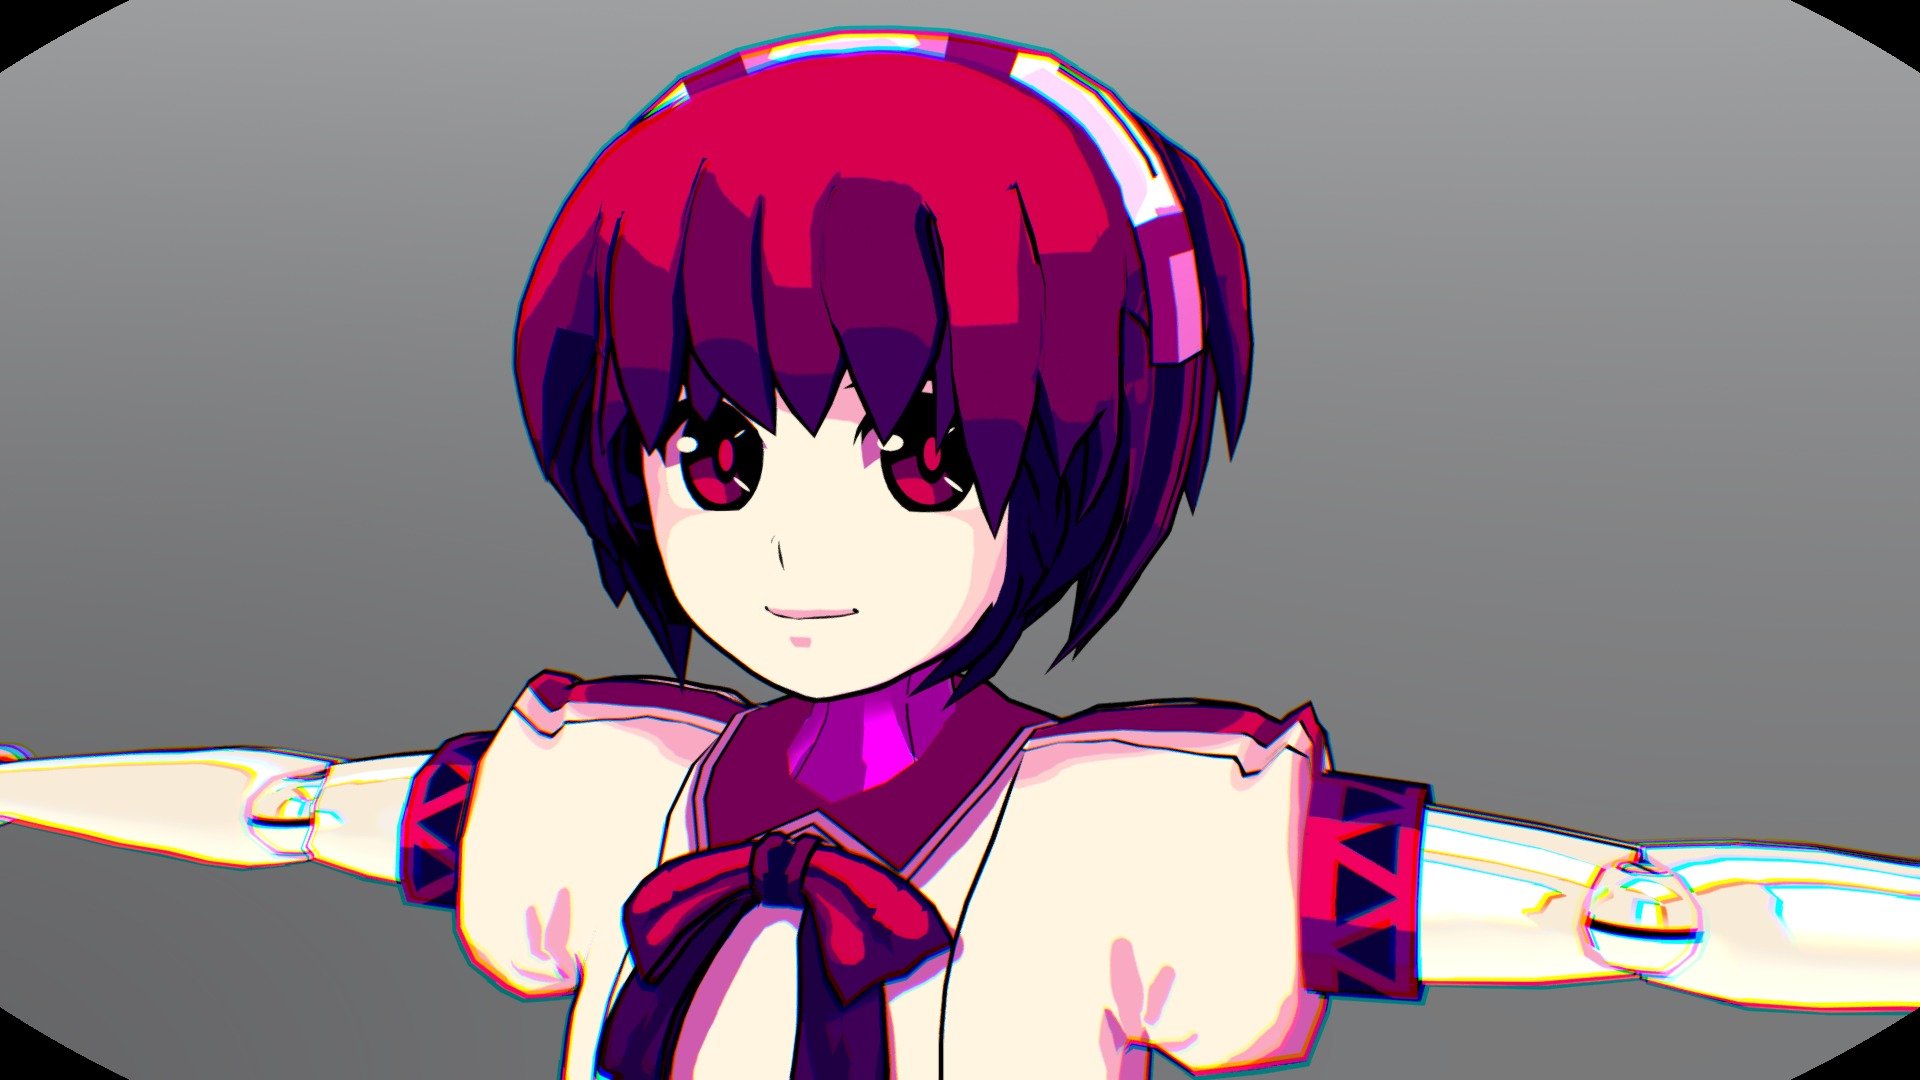 Updated 9/14/2020 New shader, new unity version, new package.
If you have any issues with the model turning pink, reimport the shader: https://github.com/poiyomi/PoiyomiToonShader/releases

Original character design belongs to Sukeban Games. The original creators of Va11halla.

Dont know if this still counts towards cute robot contest. I did upload within the contest period but didnt actually know about it.

This one was alot of fun to make. A friend of mine was playing this game in discord and it brought me back to when I first played the game.
Model is vrchat ready and armeture is setup to use with full body.
Included is a unity package with a prefab of the model setup for vrchat.
Just make sure you've imported the vrchat sdk before you import it 3d model